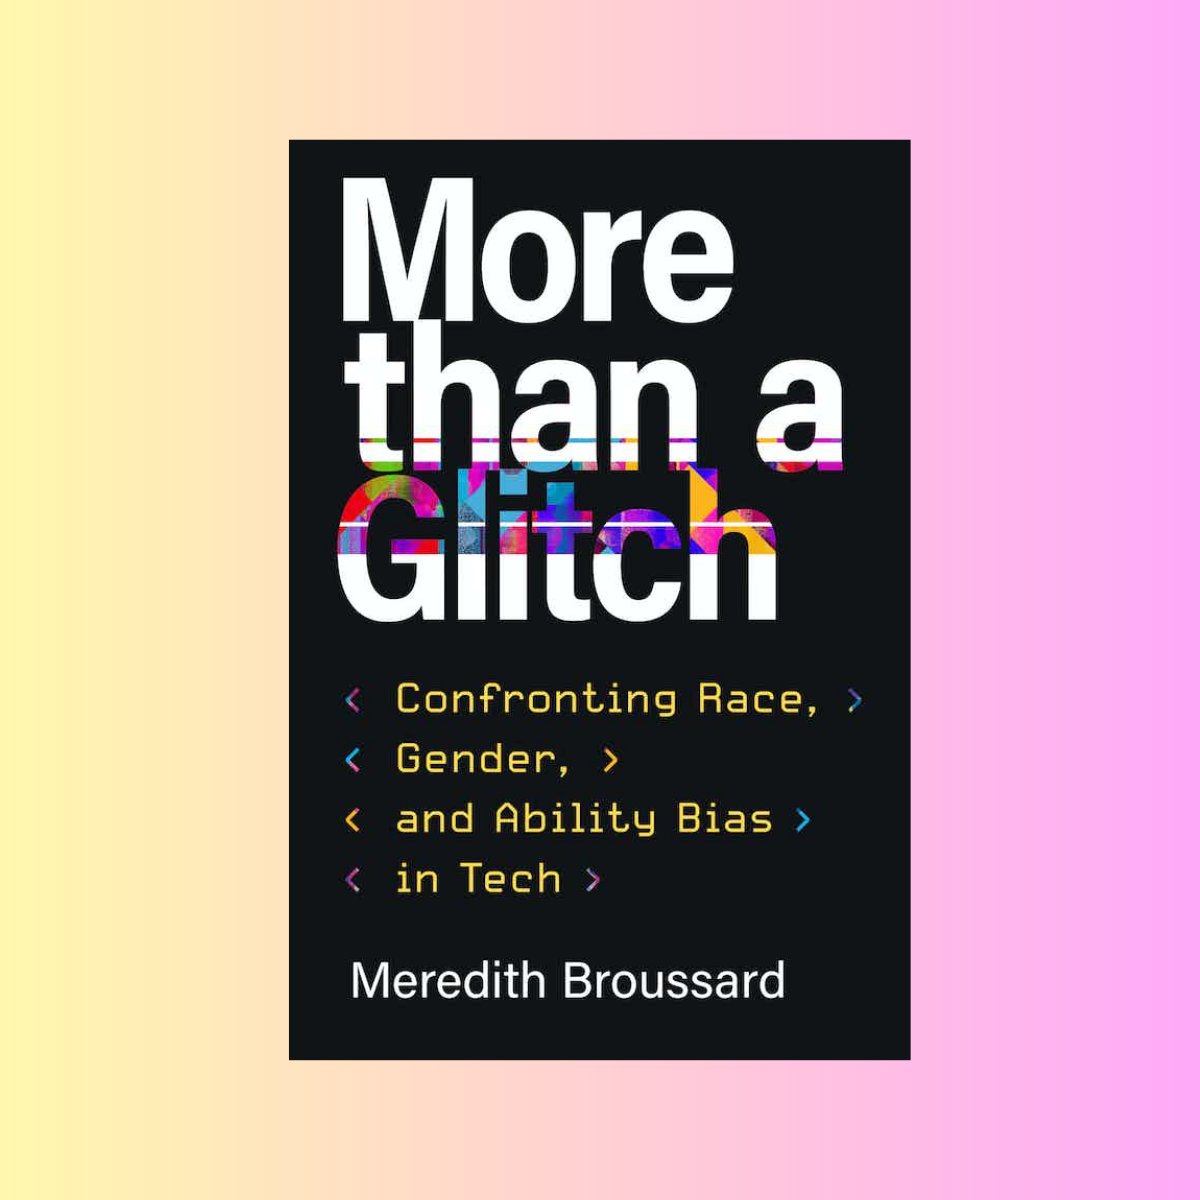 To coincide with the launch of her book *More than a Glitch*, we’re looking forward to hosting @merbroussard for a talk on “Confronting Race, Gender and Ability Bias in Tech” on 10th May 2023. Further details and registration link here: kingsdh.net/2023/05/03/mer…